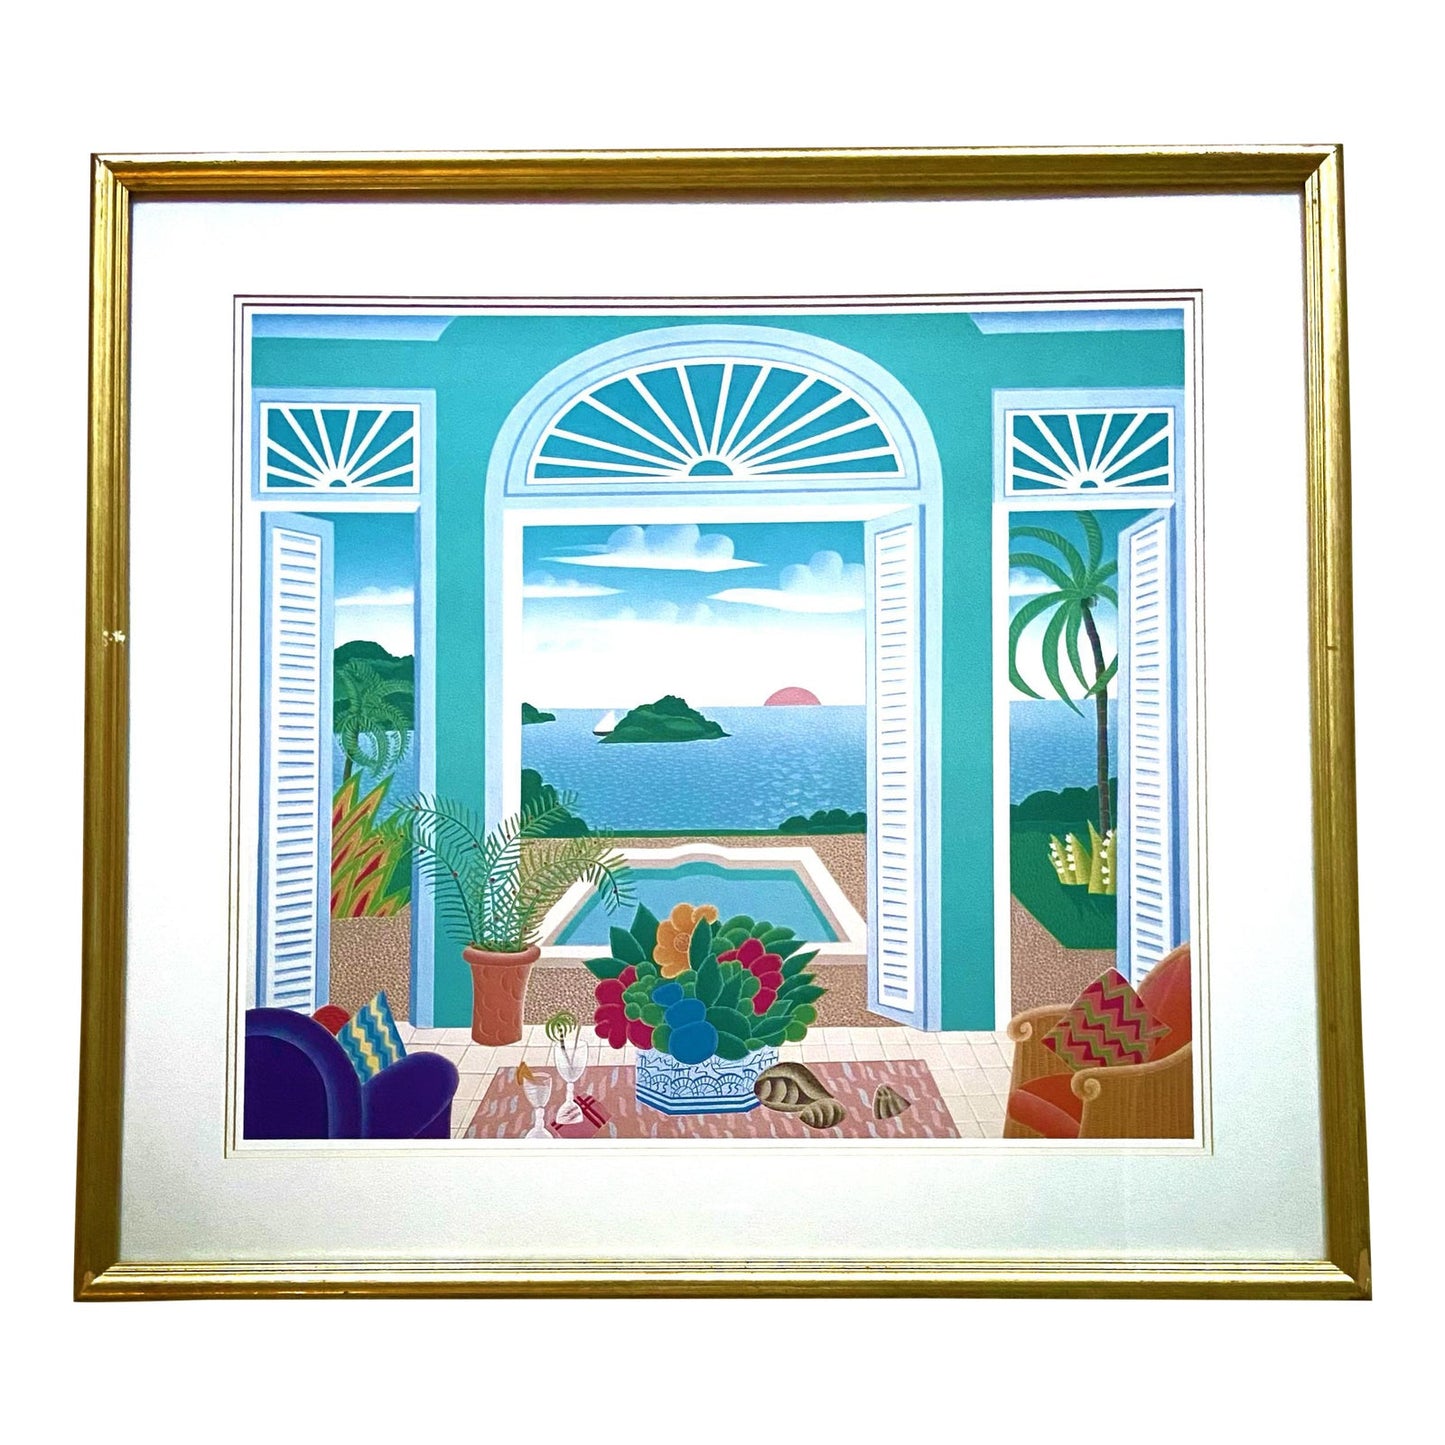 [SOLD] Thomas McKnight Mustique Waterfront Vacation Painting Print